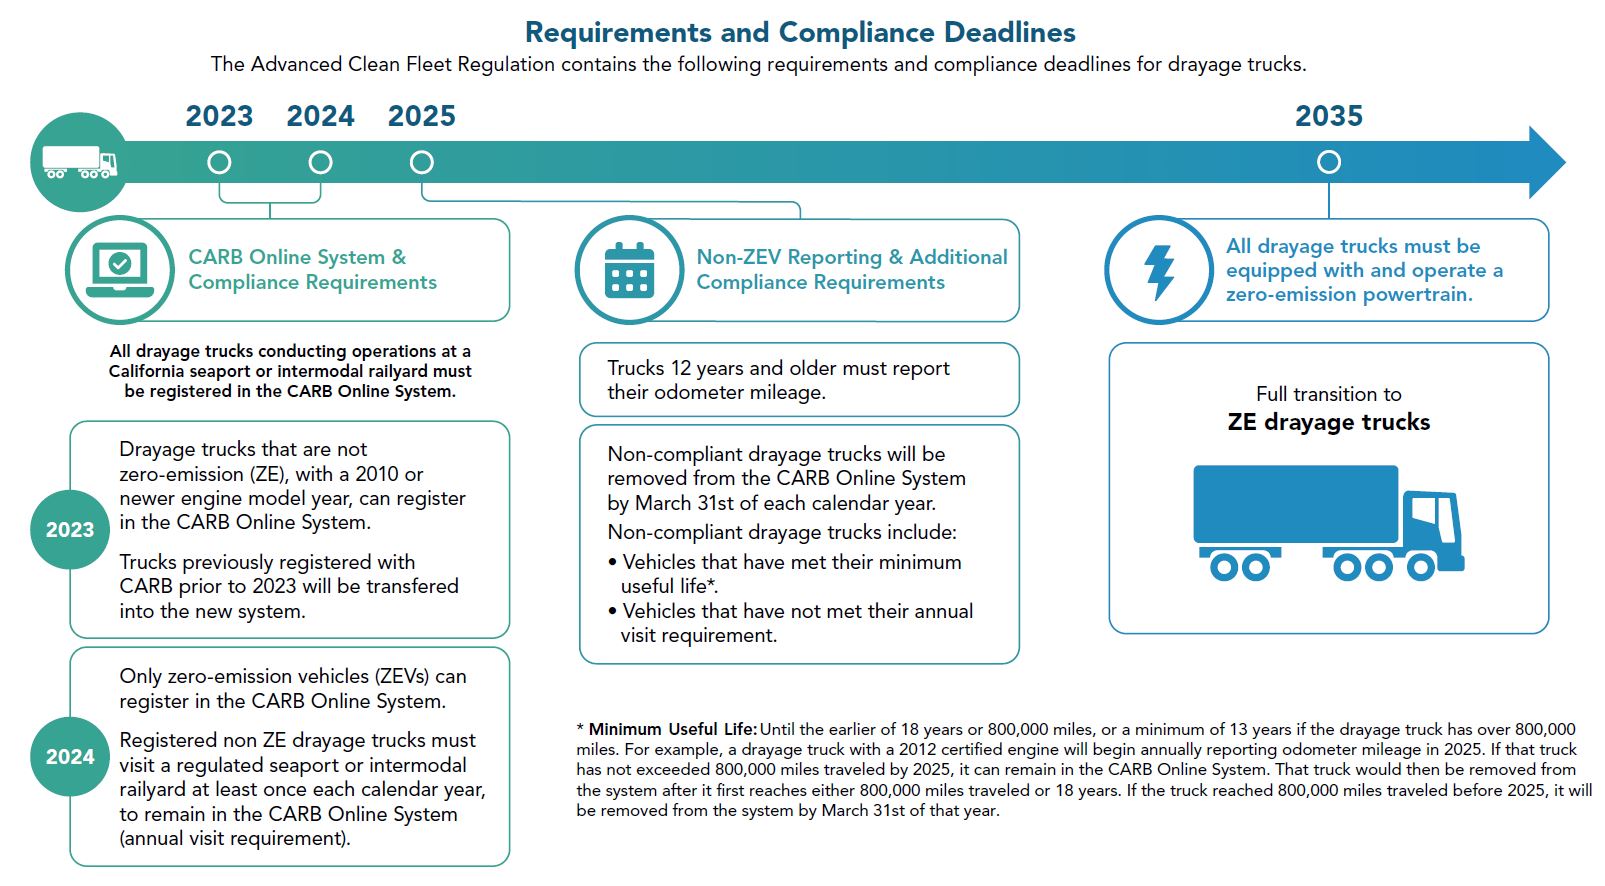 Requirements and Compliance Deadlines 